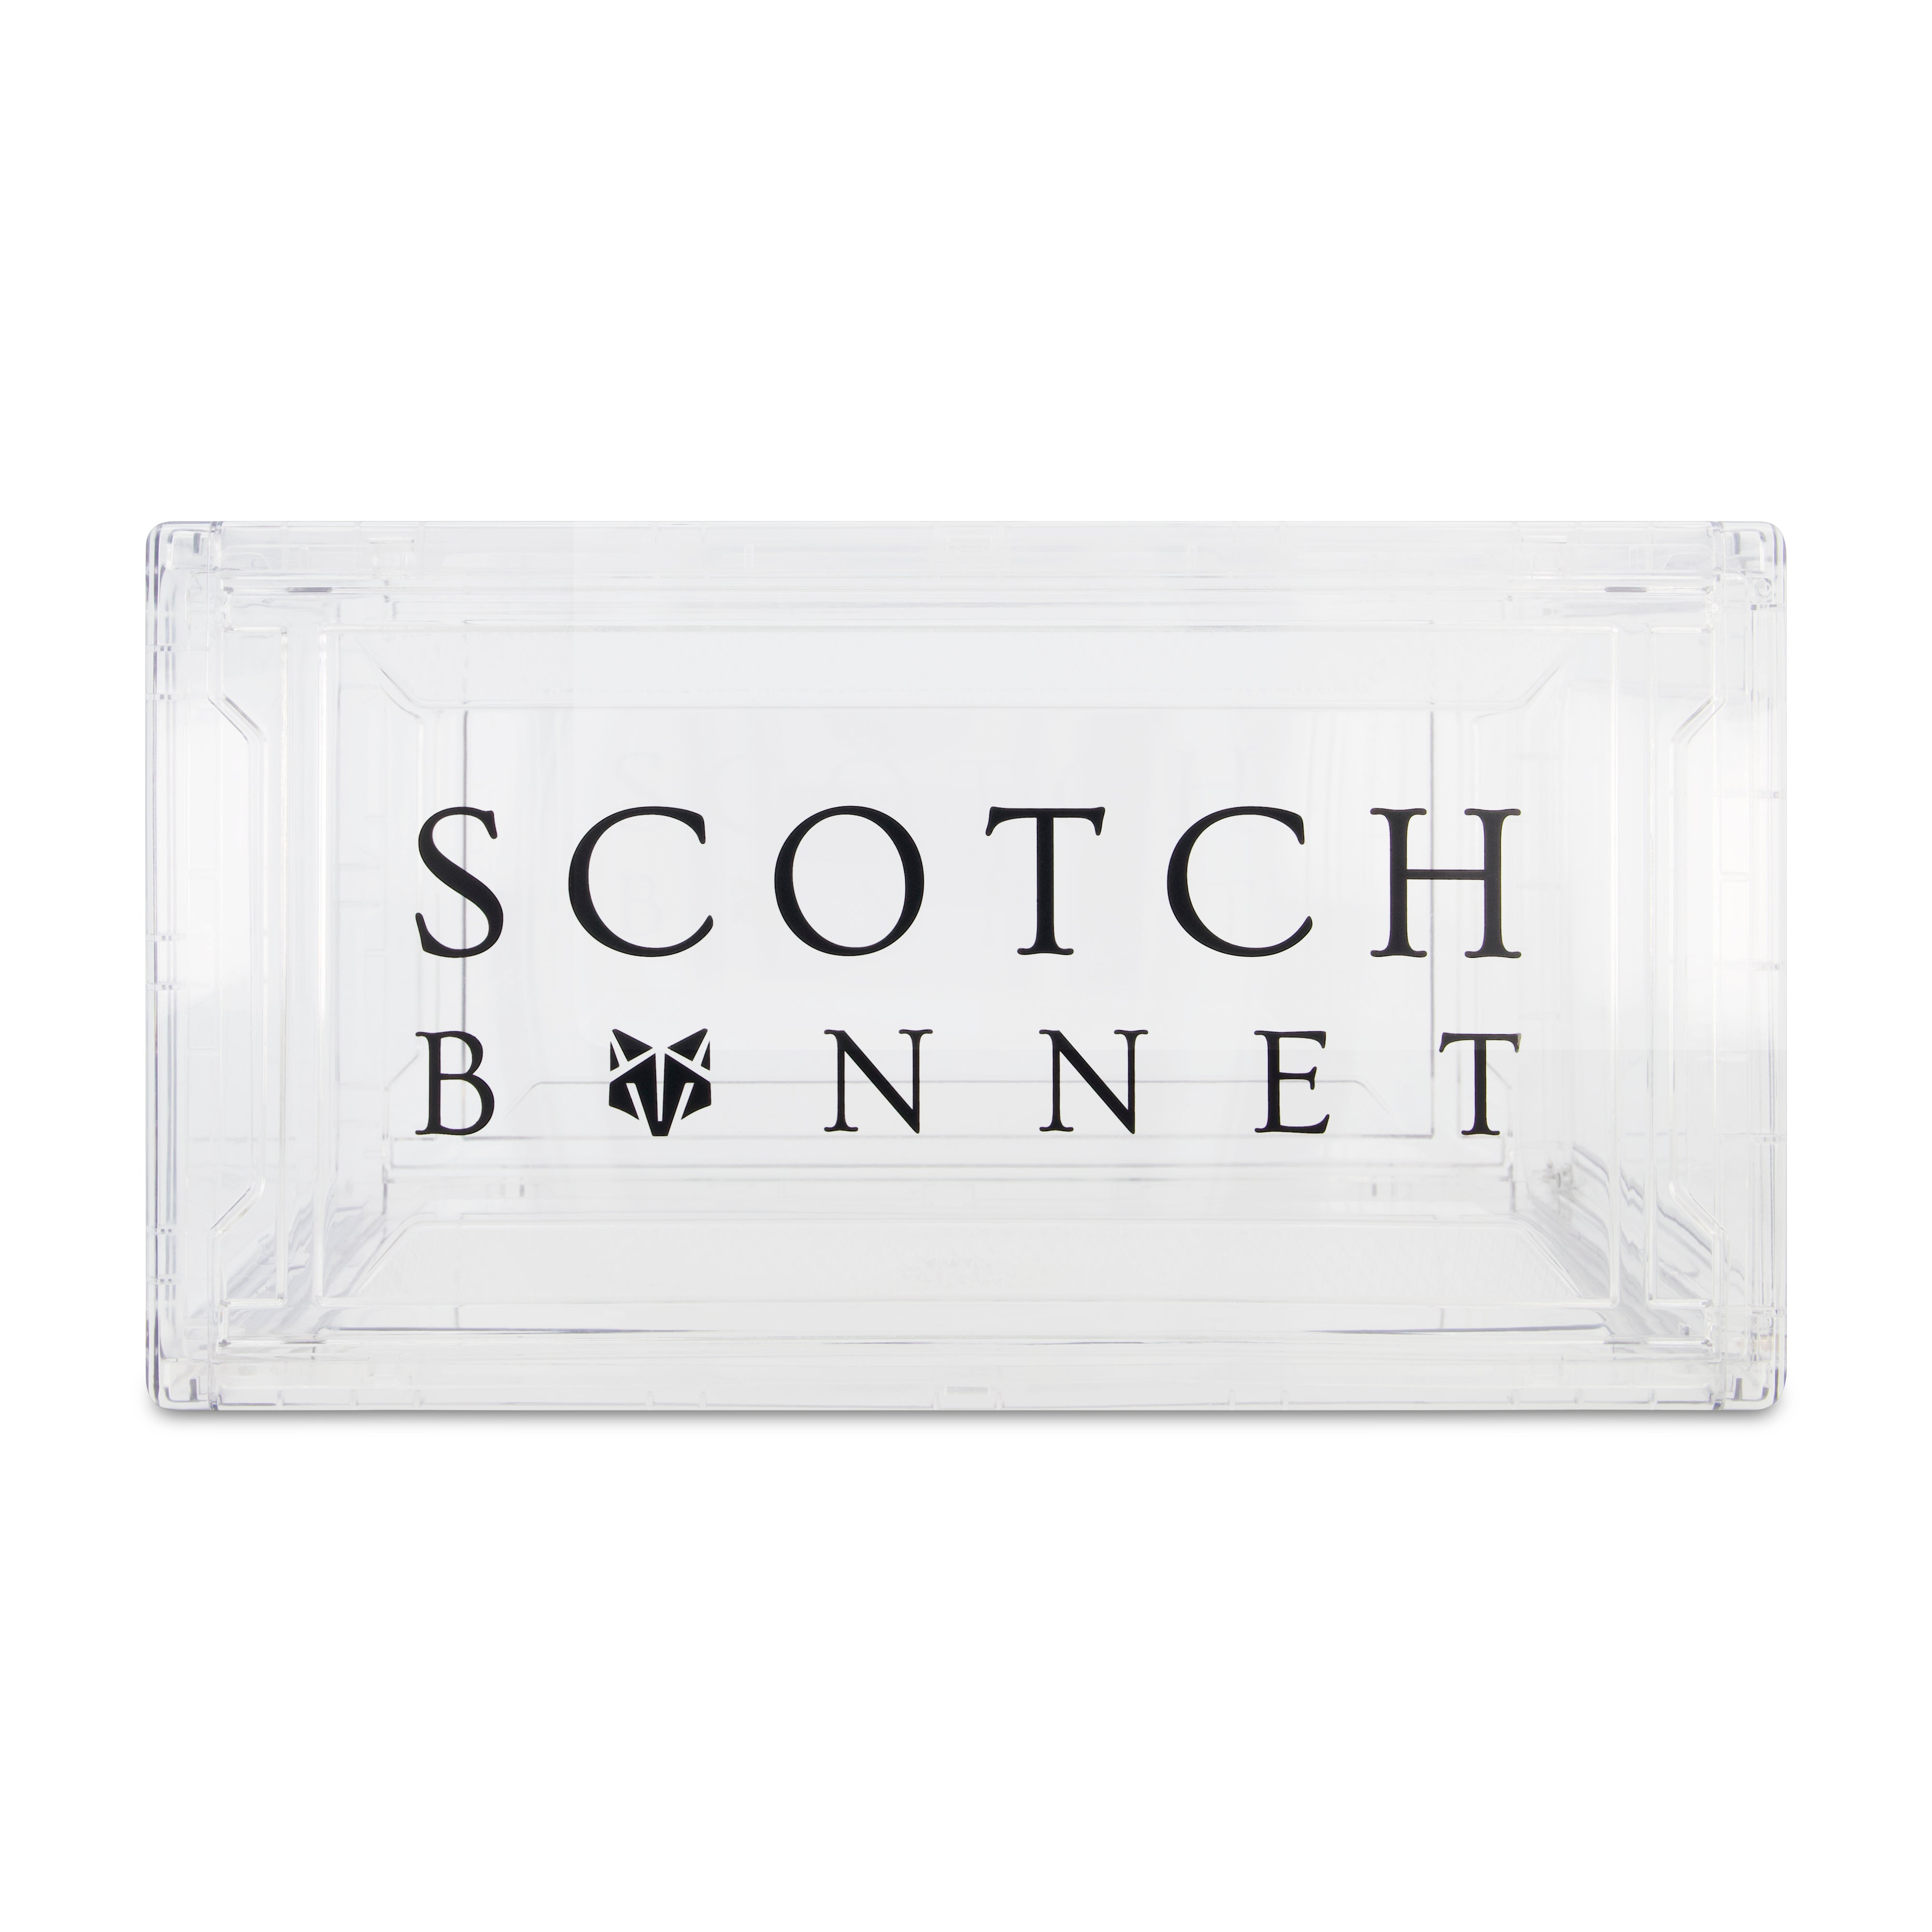 The Scotch Bonnet box   (Any order over 300$ will include a free Scotch Bonnet box)